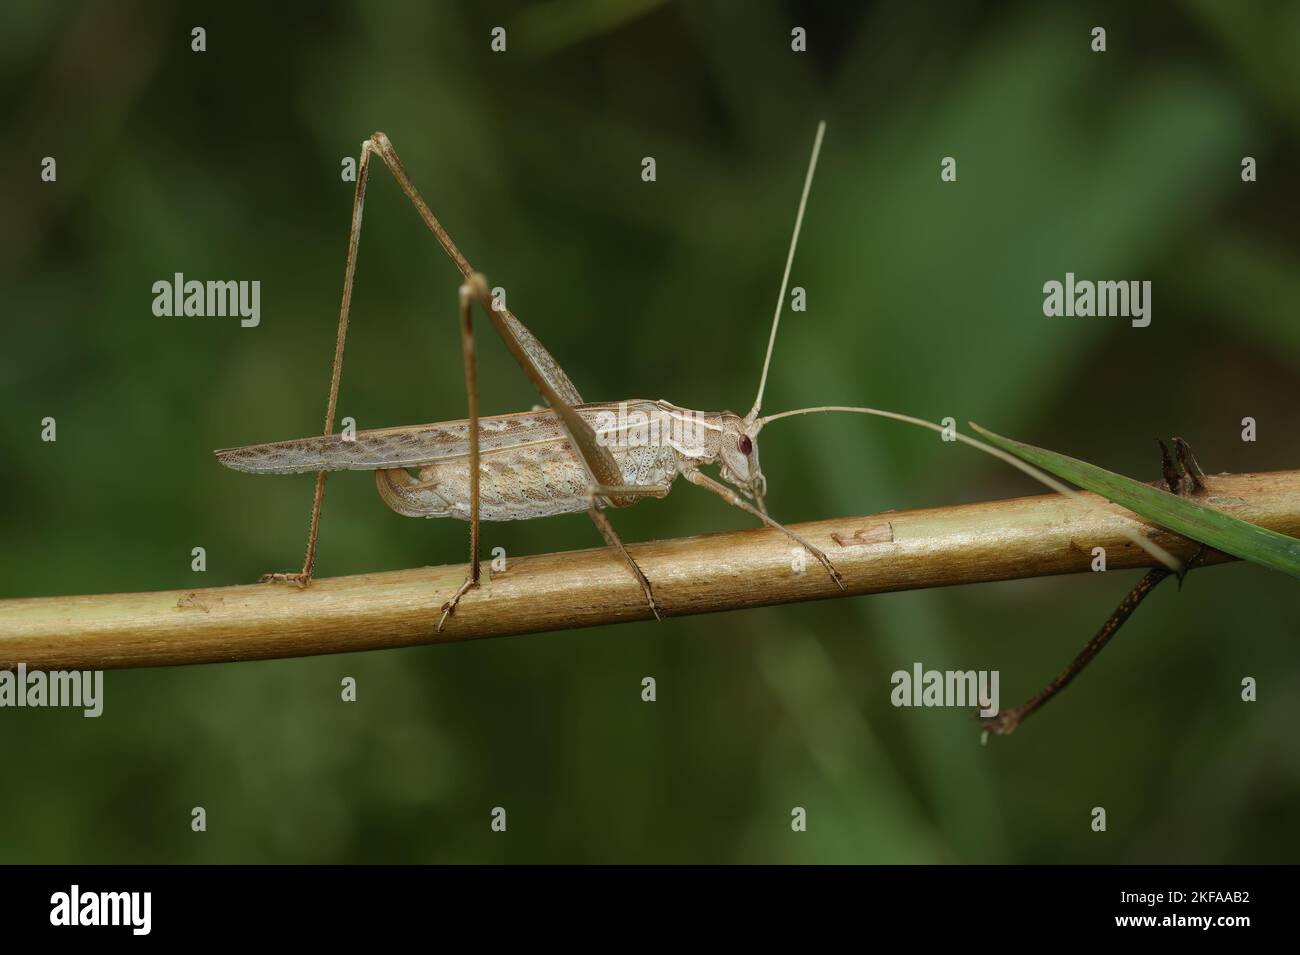 Natural closeup of a Long-horned grasshopper , Tylopsis lilifolia, walking on a twig Stock Photo